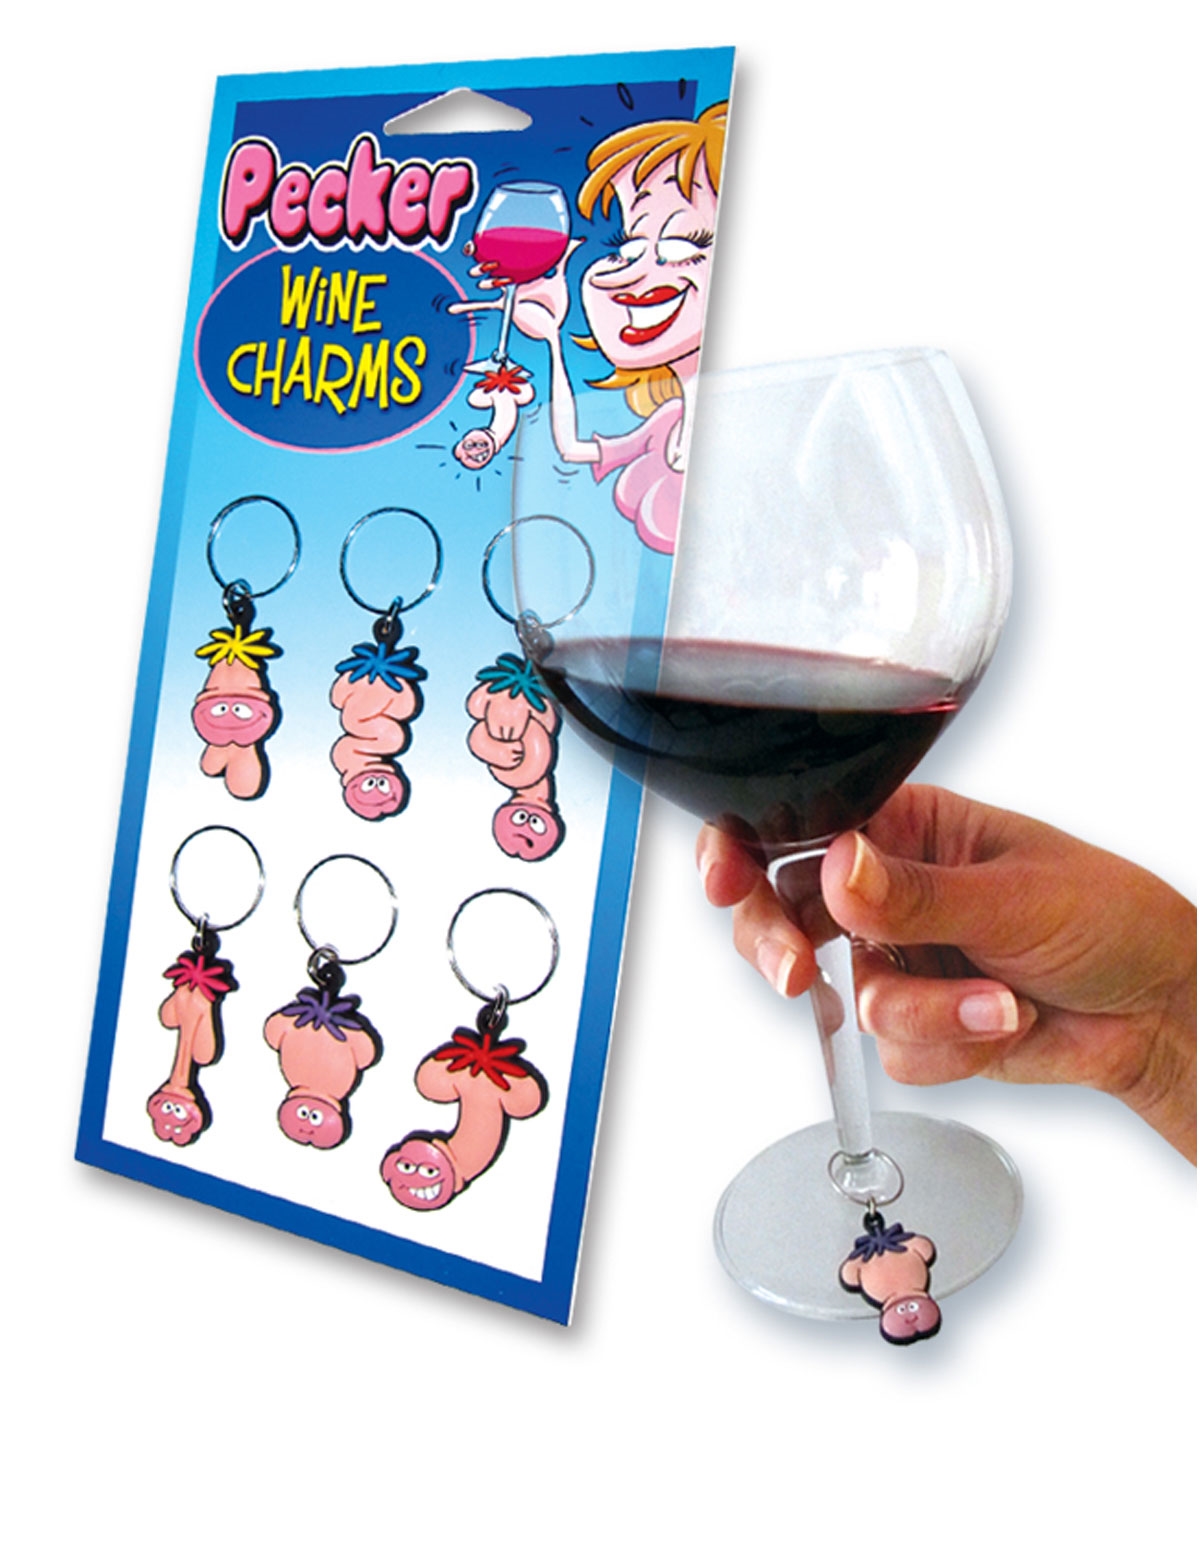 alternate image for Pecker Wine Charms